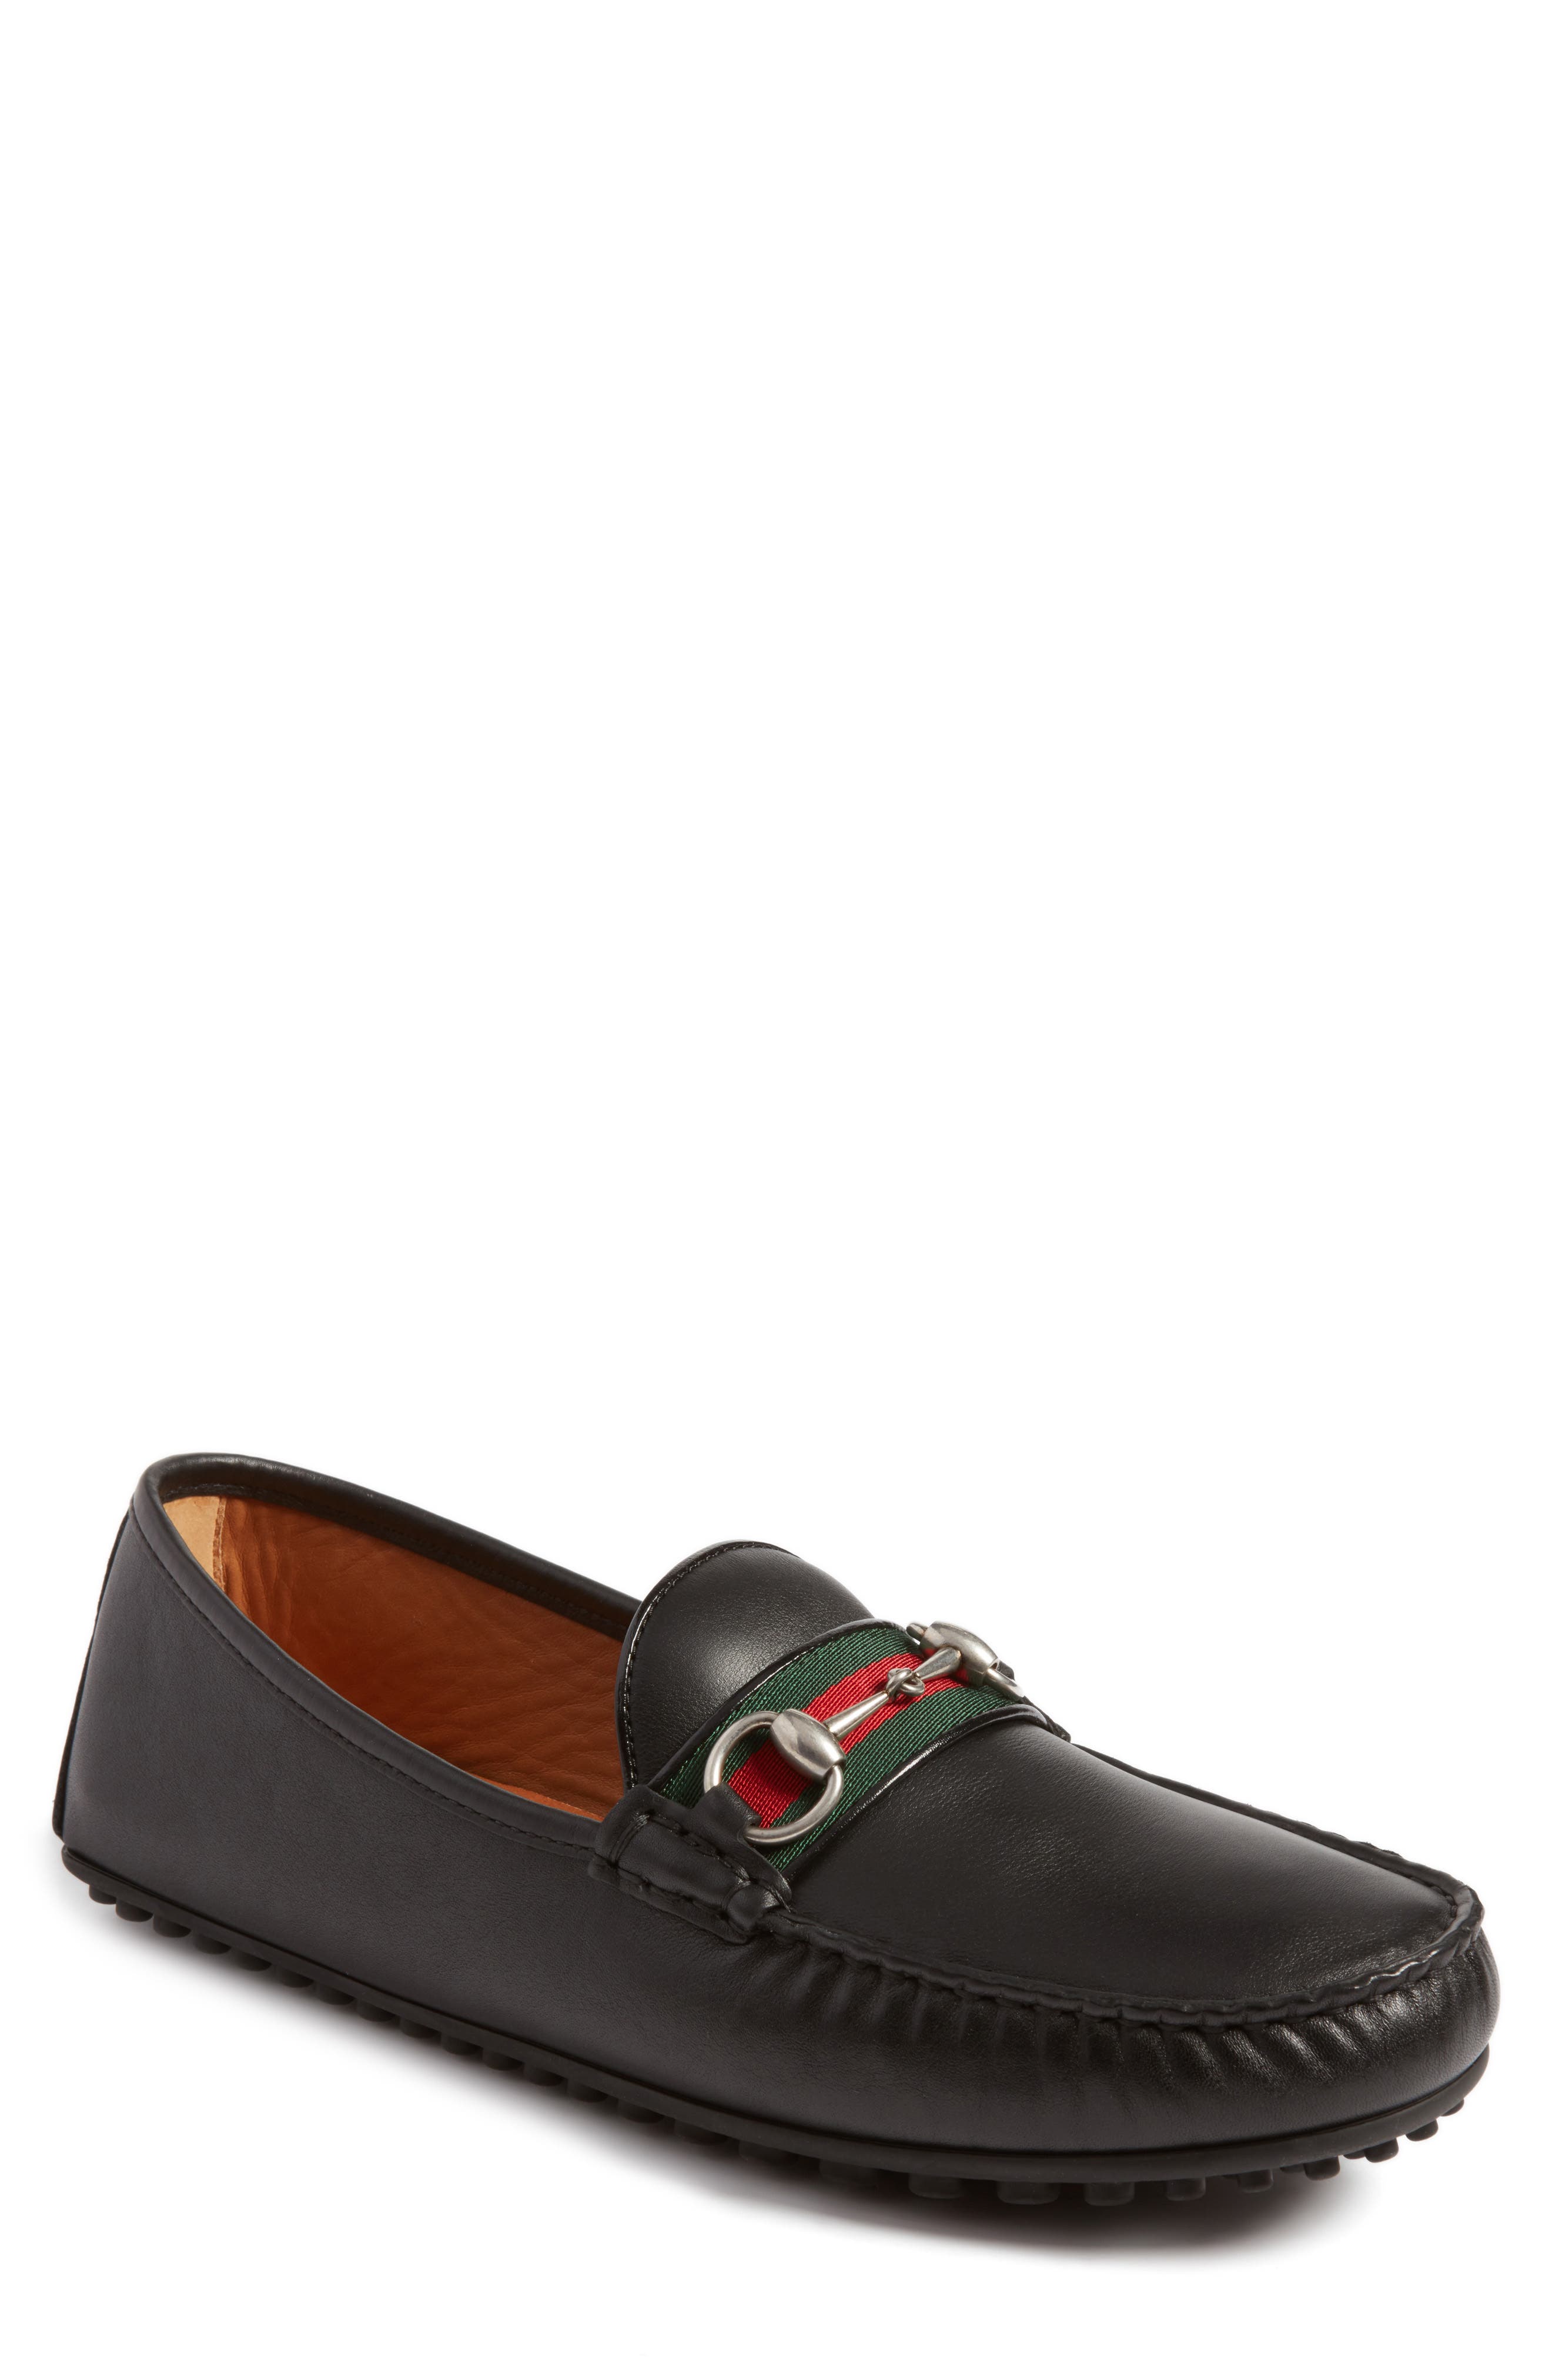 gucci loafers price